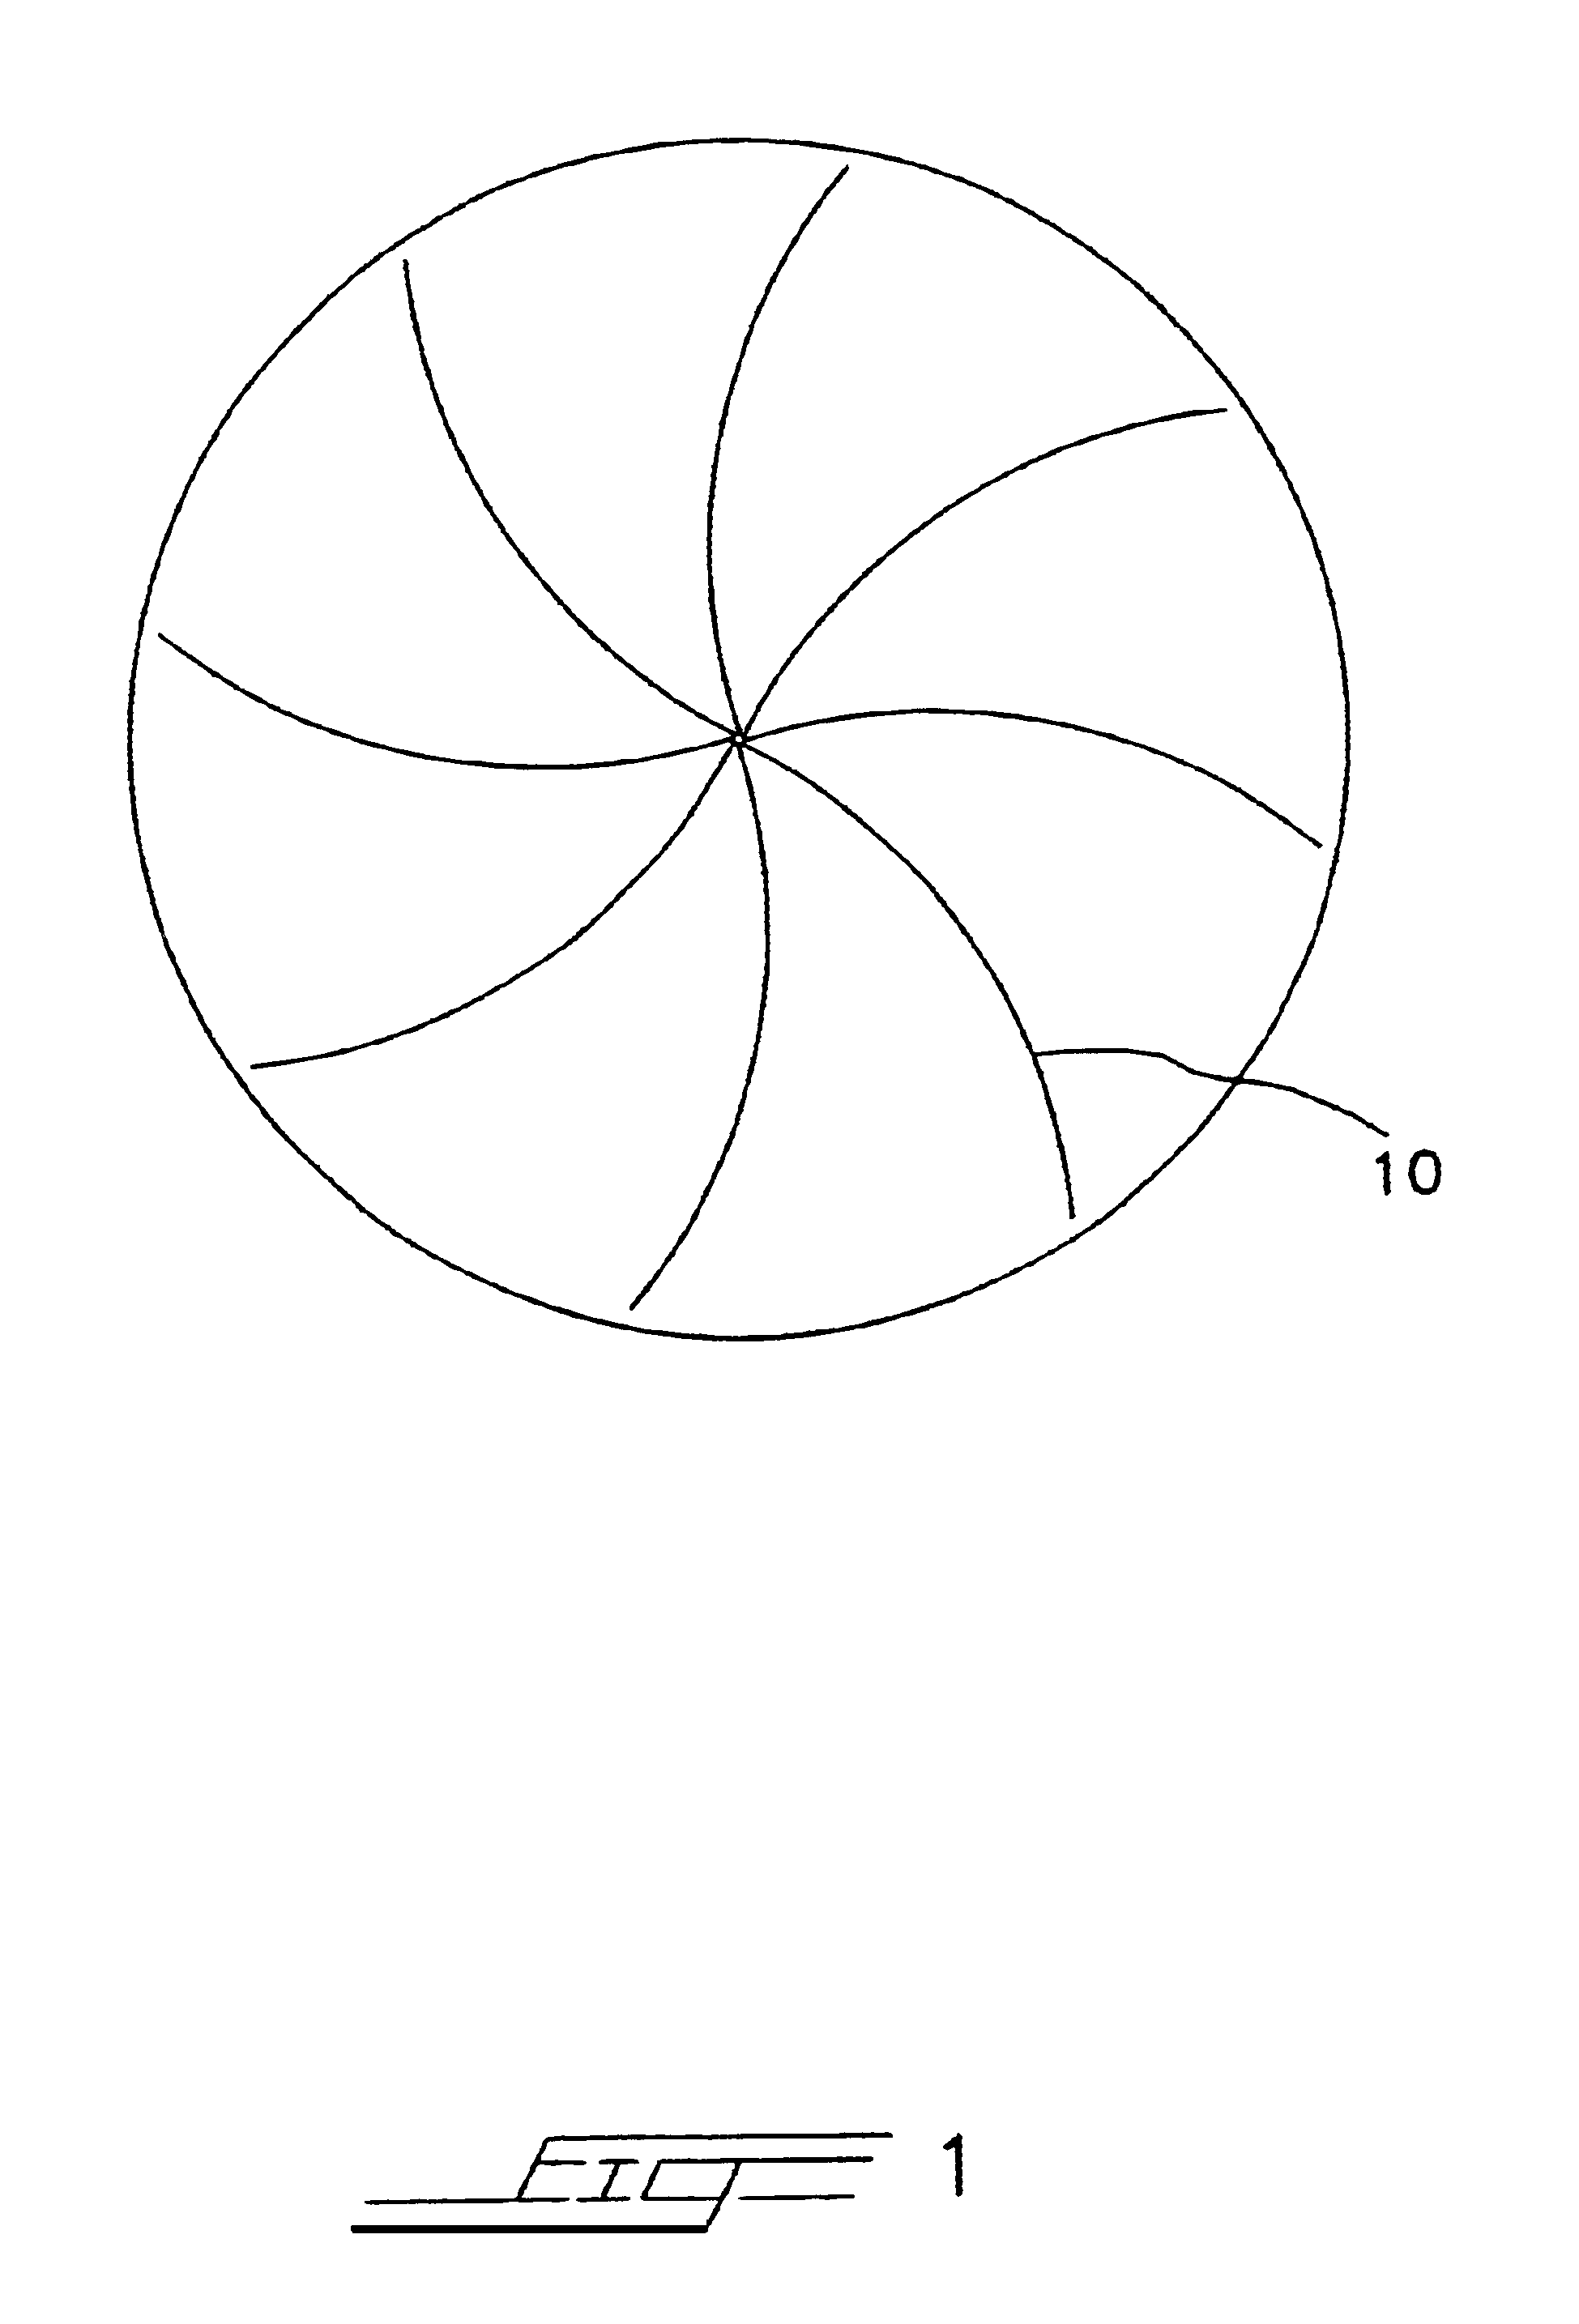 Polishing pad for use in chemical-mechanical planarization of semiconductor wafers and method of making same